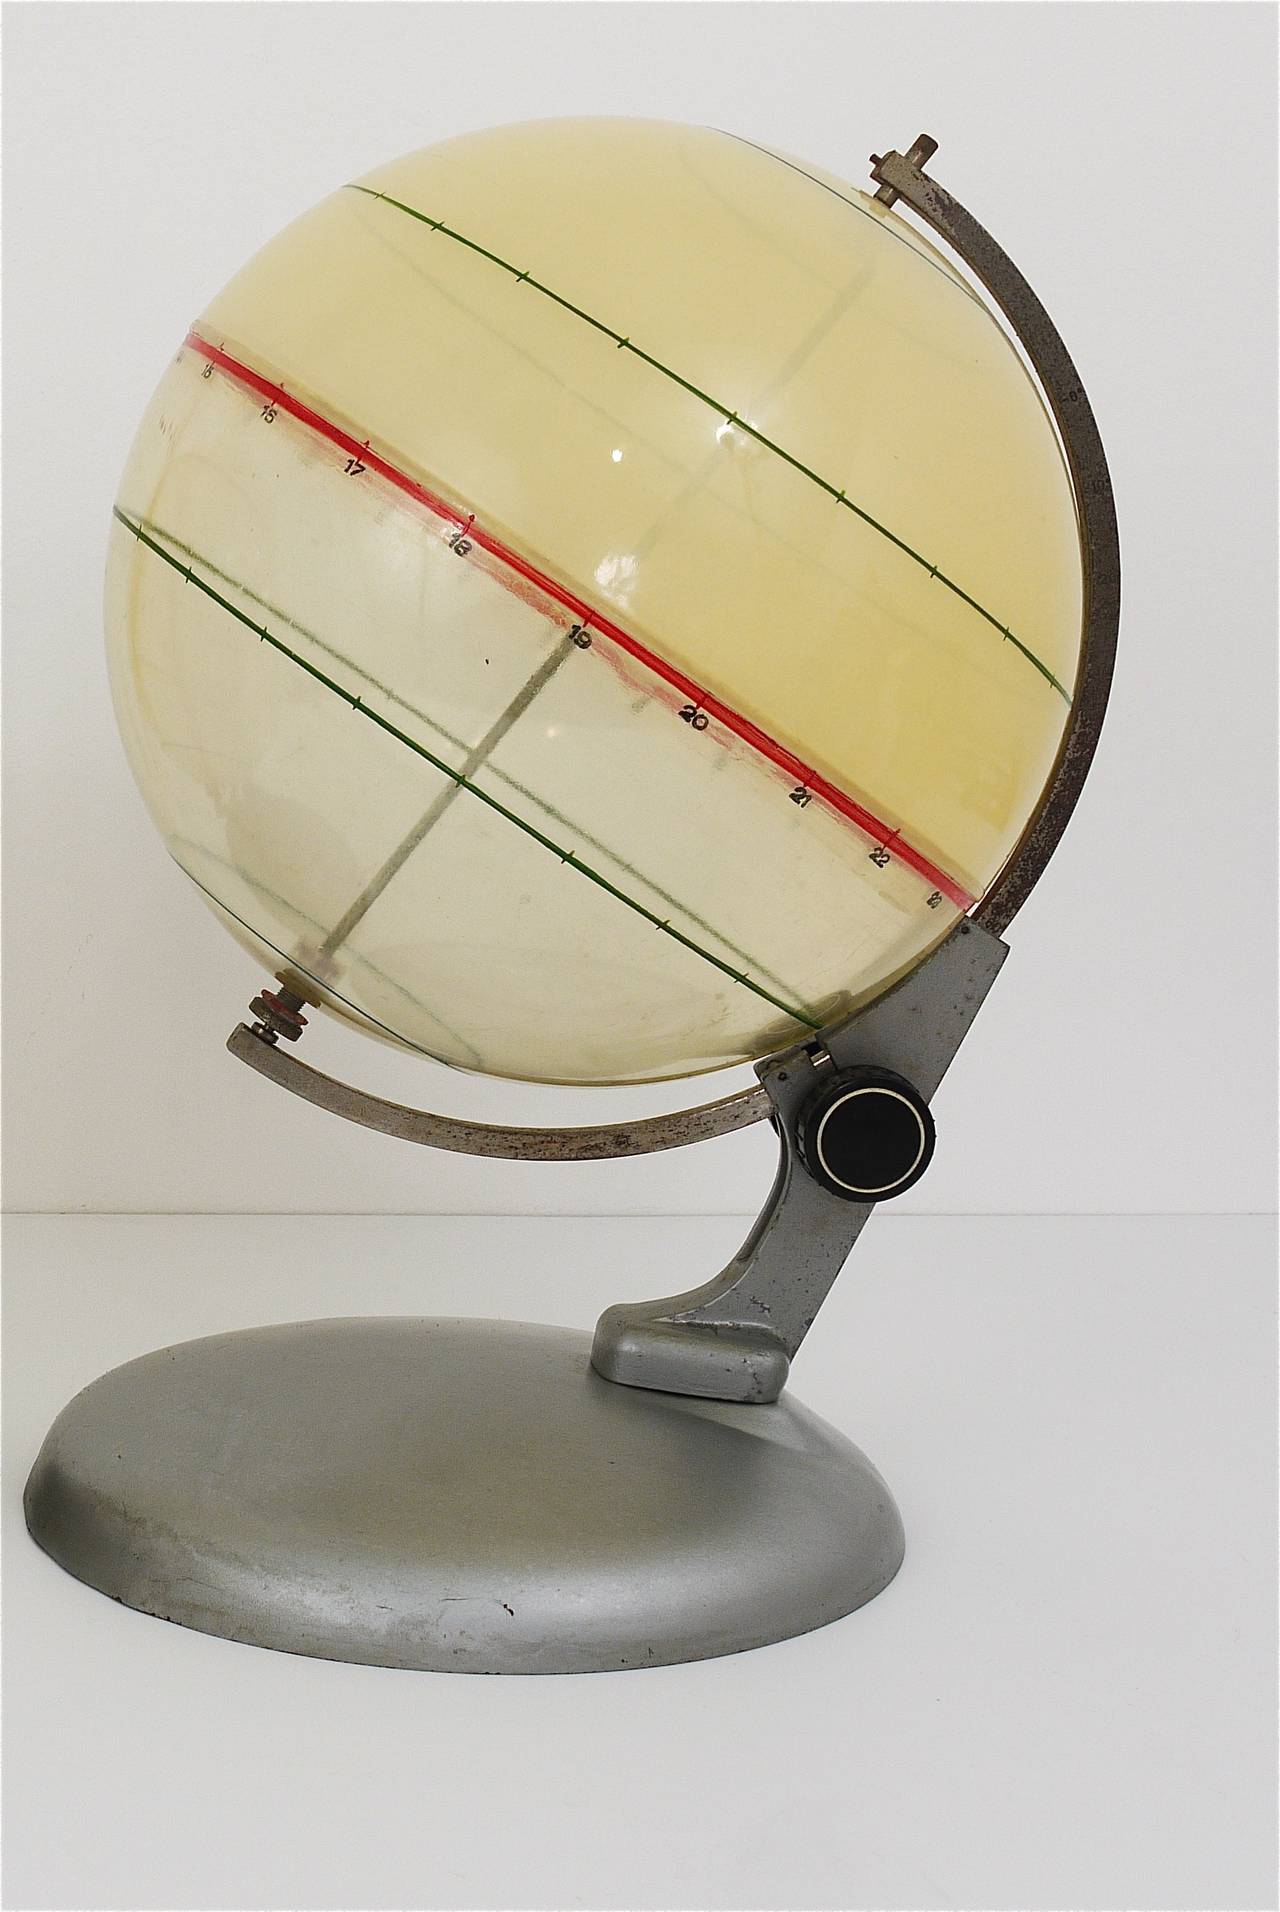 Mid-Century Modern Educational Terrestrial Globe from the 1960s